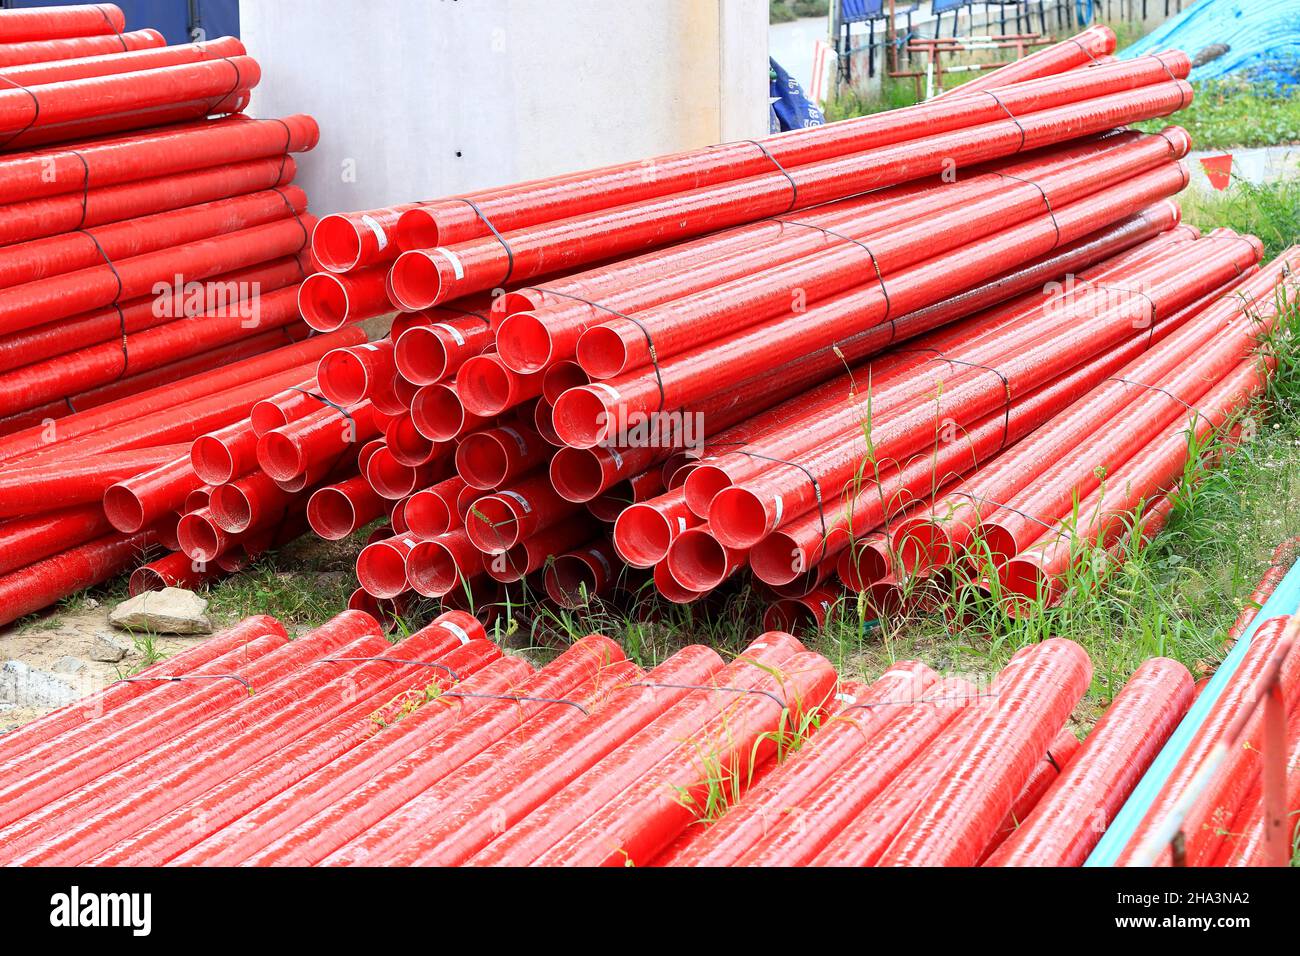 Red Fiberglass pipes at construction site, Corrosion resistant fiberglass composite pipe used in industrial applications. Stock Photo